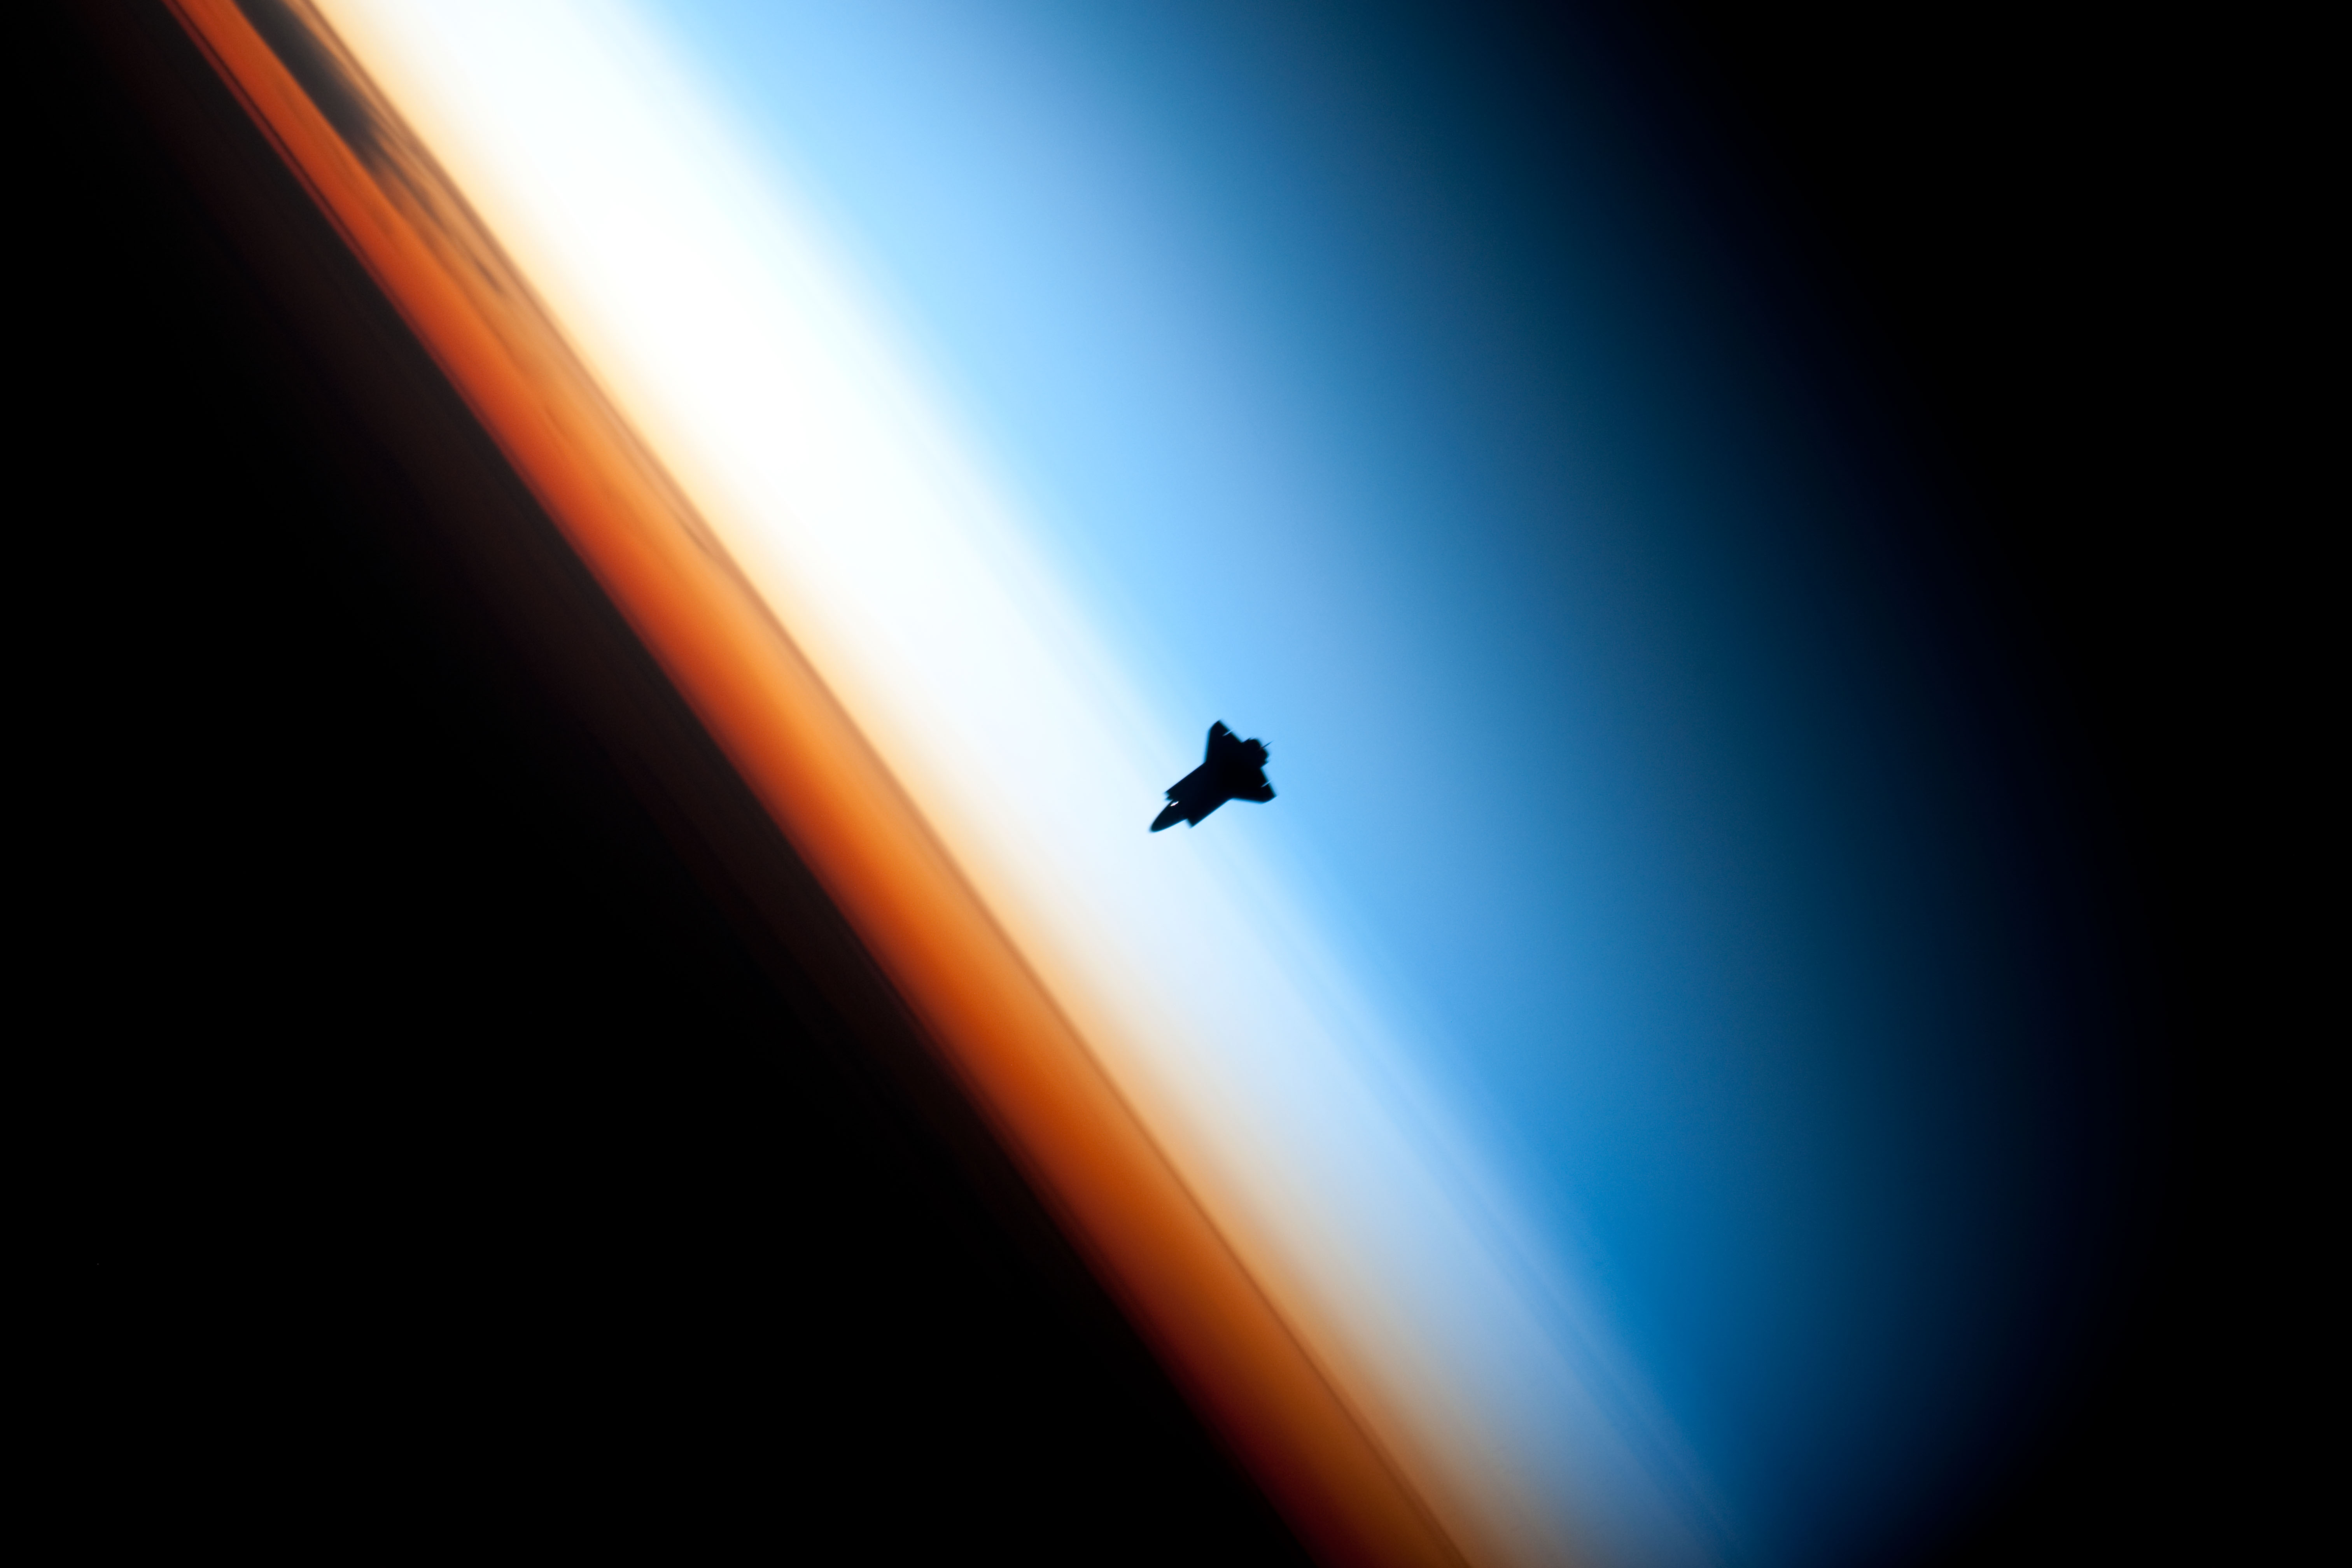 Endeavour_silhouette_STS-130 - WikiMedia Commons